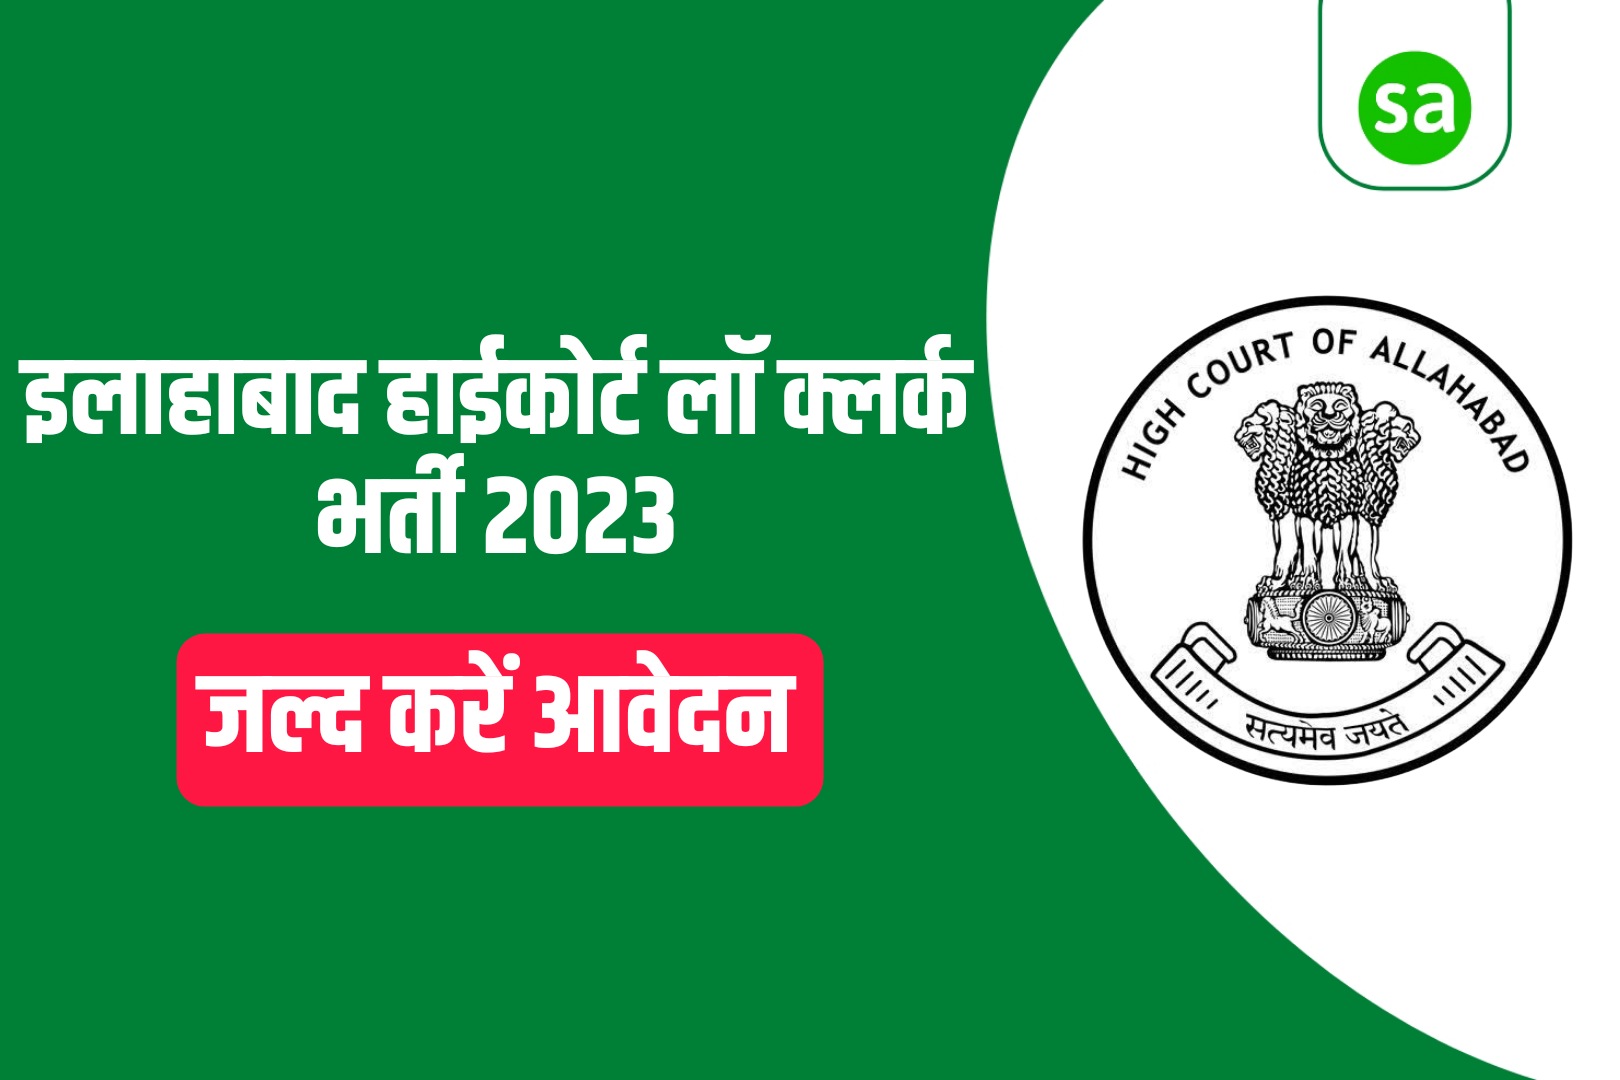 Allahabad High Court Law Clerk Recruitment 2023 Online Form